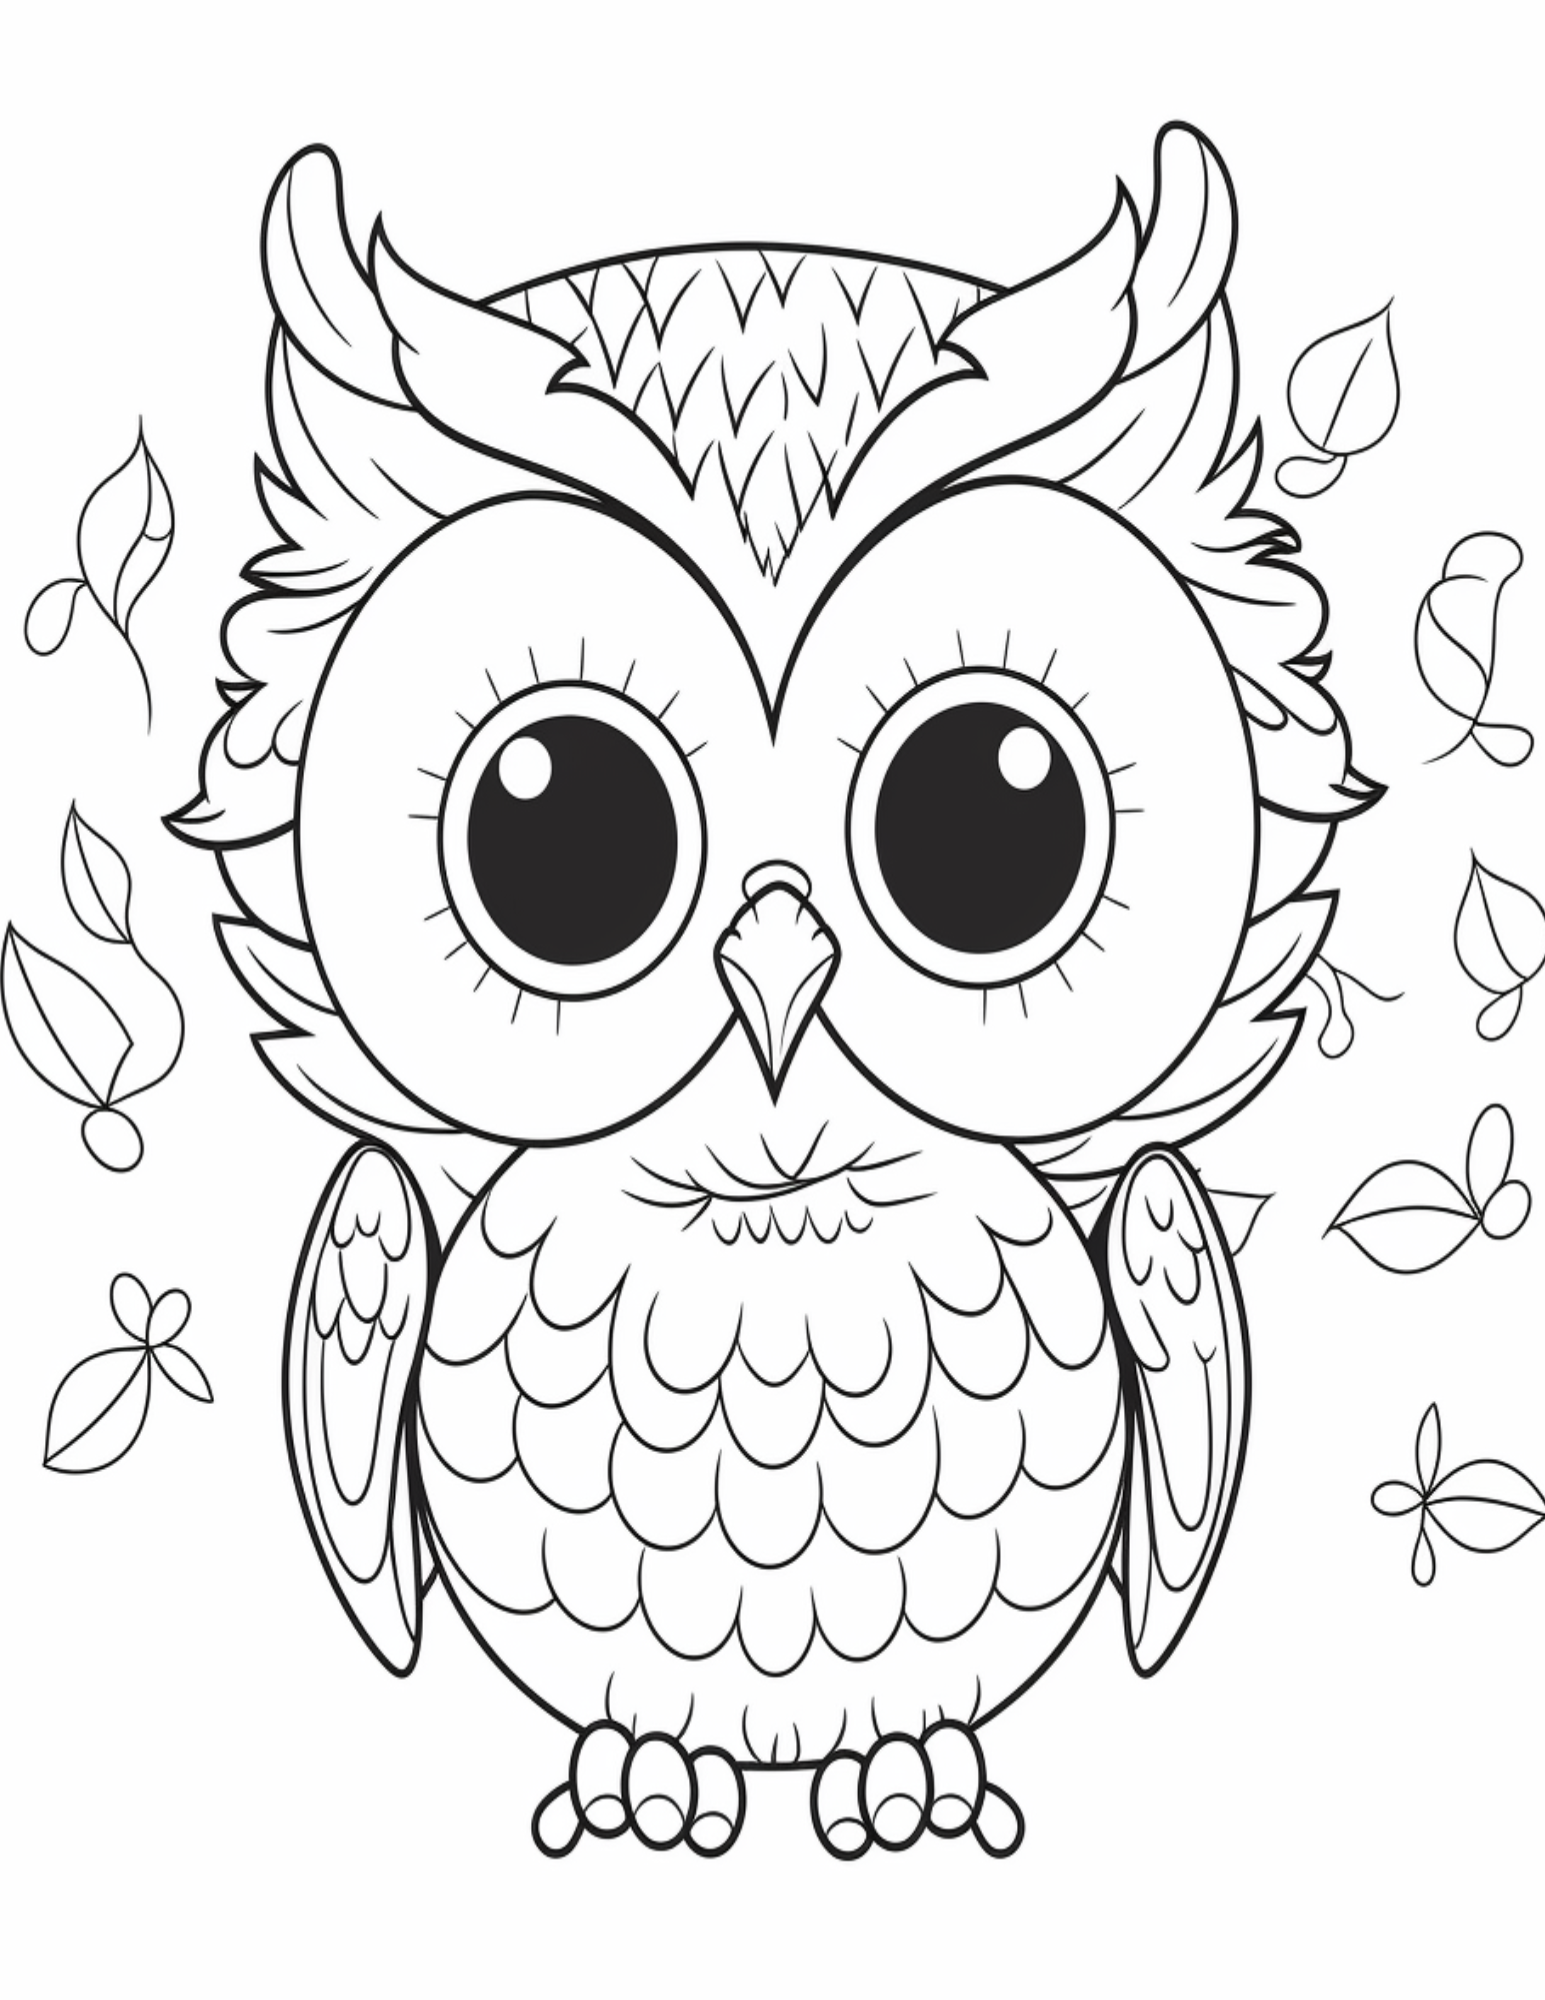 Printable digital owl coloring pages whimsyowls coloring collection